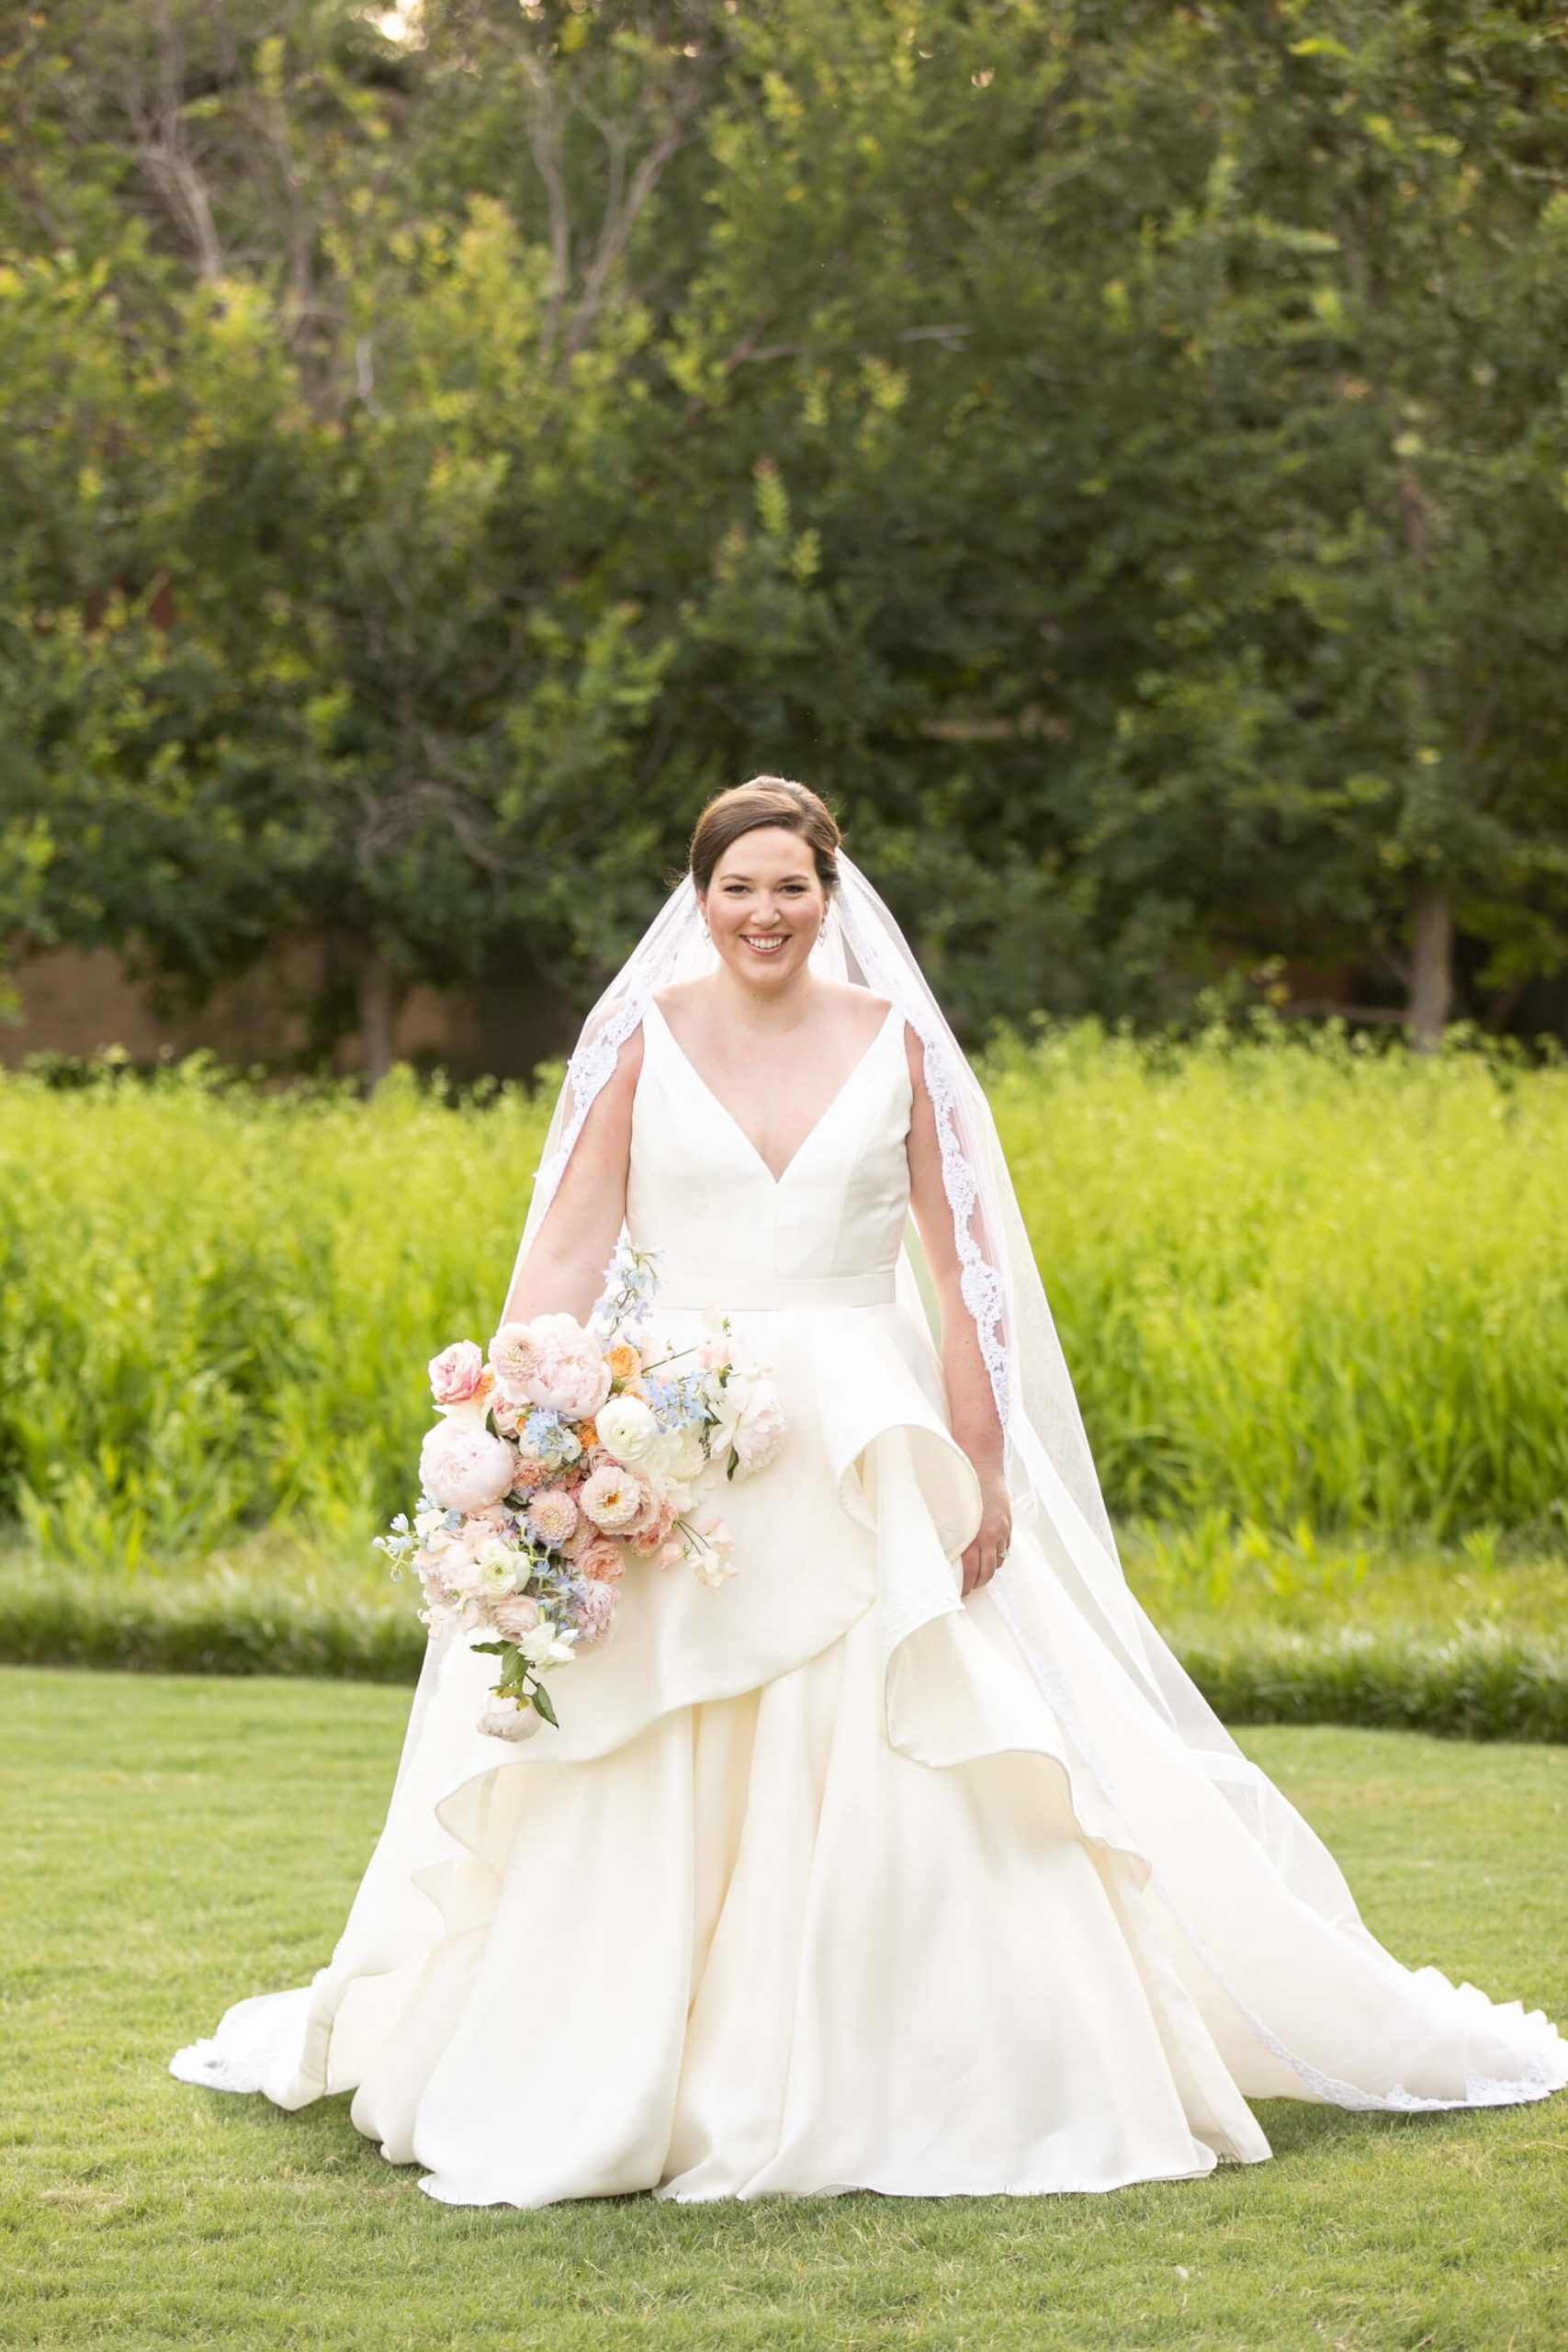 Carole Anne in her bridal gown in a park with bouquet